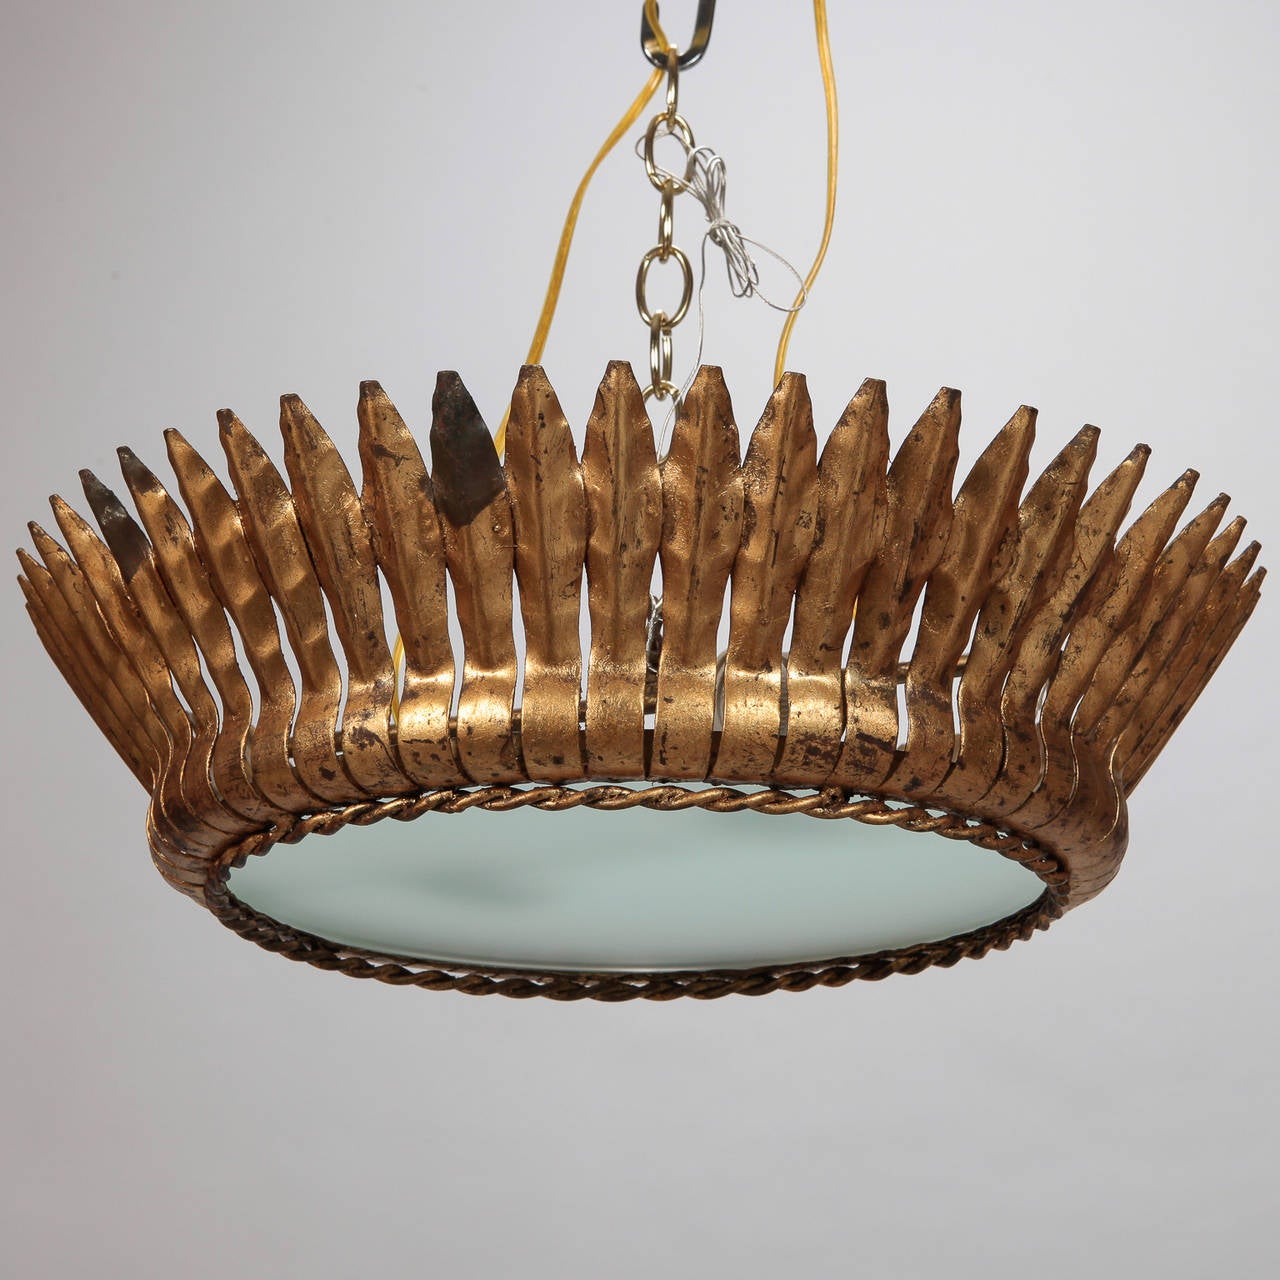 Circa 1950s sunburst / starburst shaped gilt metal hanging fixture has round center of white satin glass framed with uniform rays suspended from central chain. Inside are two full size light sockets that have been updated for US electrical